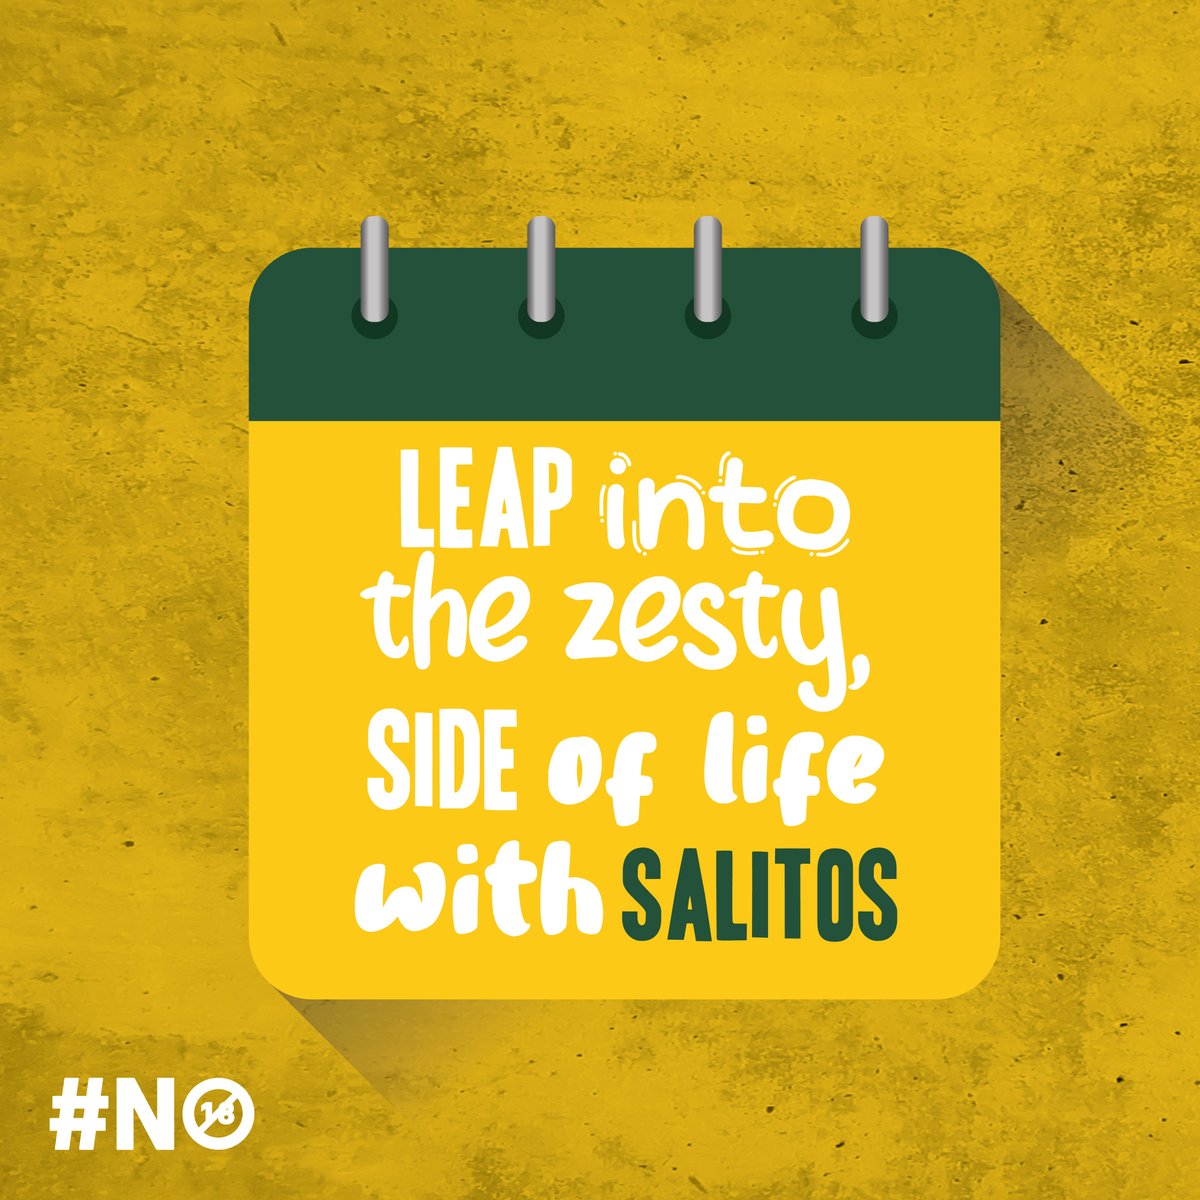 One extra day calls for one extra reason to enjoy SALITOS! 🕺🏽Take a giant leap into the unknown, and let’s make 2020-more a memorable one. 🍻Find us at @normangoodfello. #SALITOSRepublic